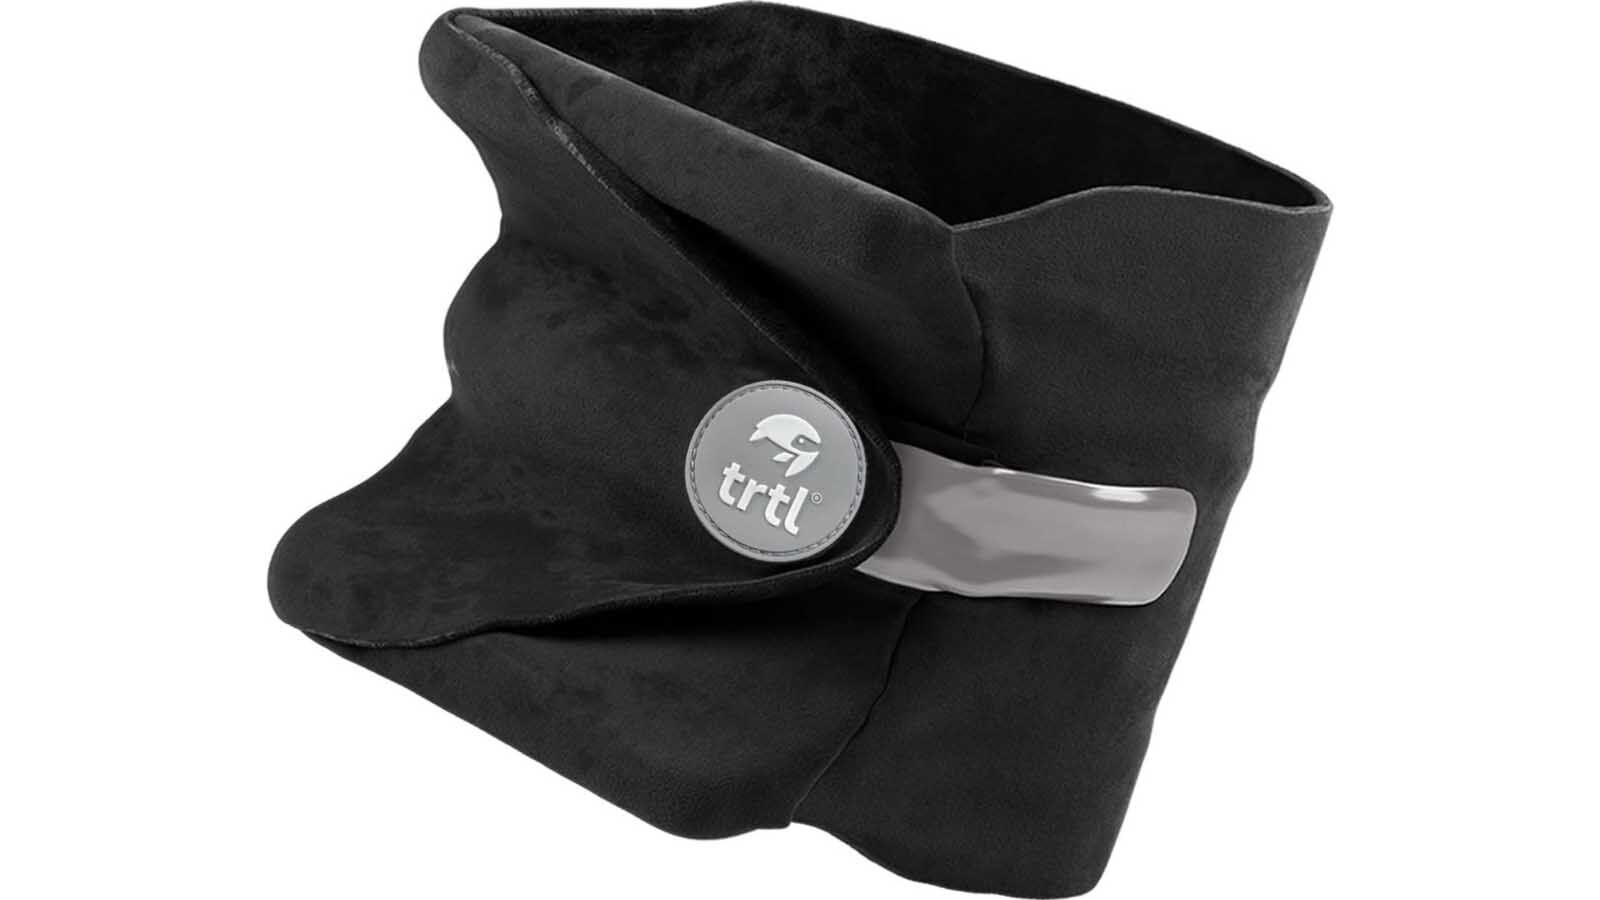 best travel gift ideas for your loved one - Trtl Travel Neck Pillow